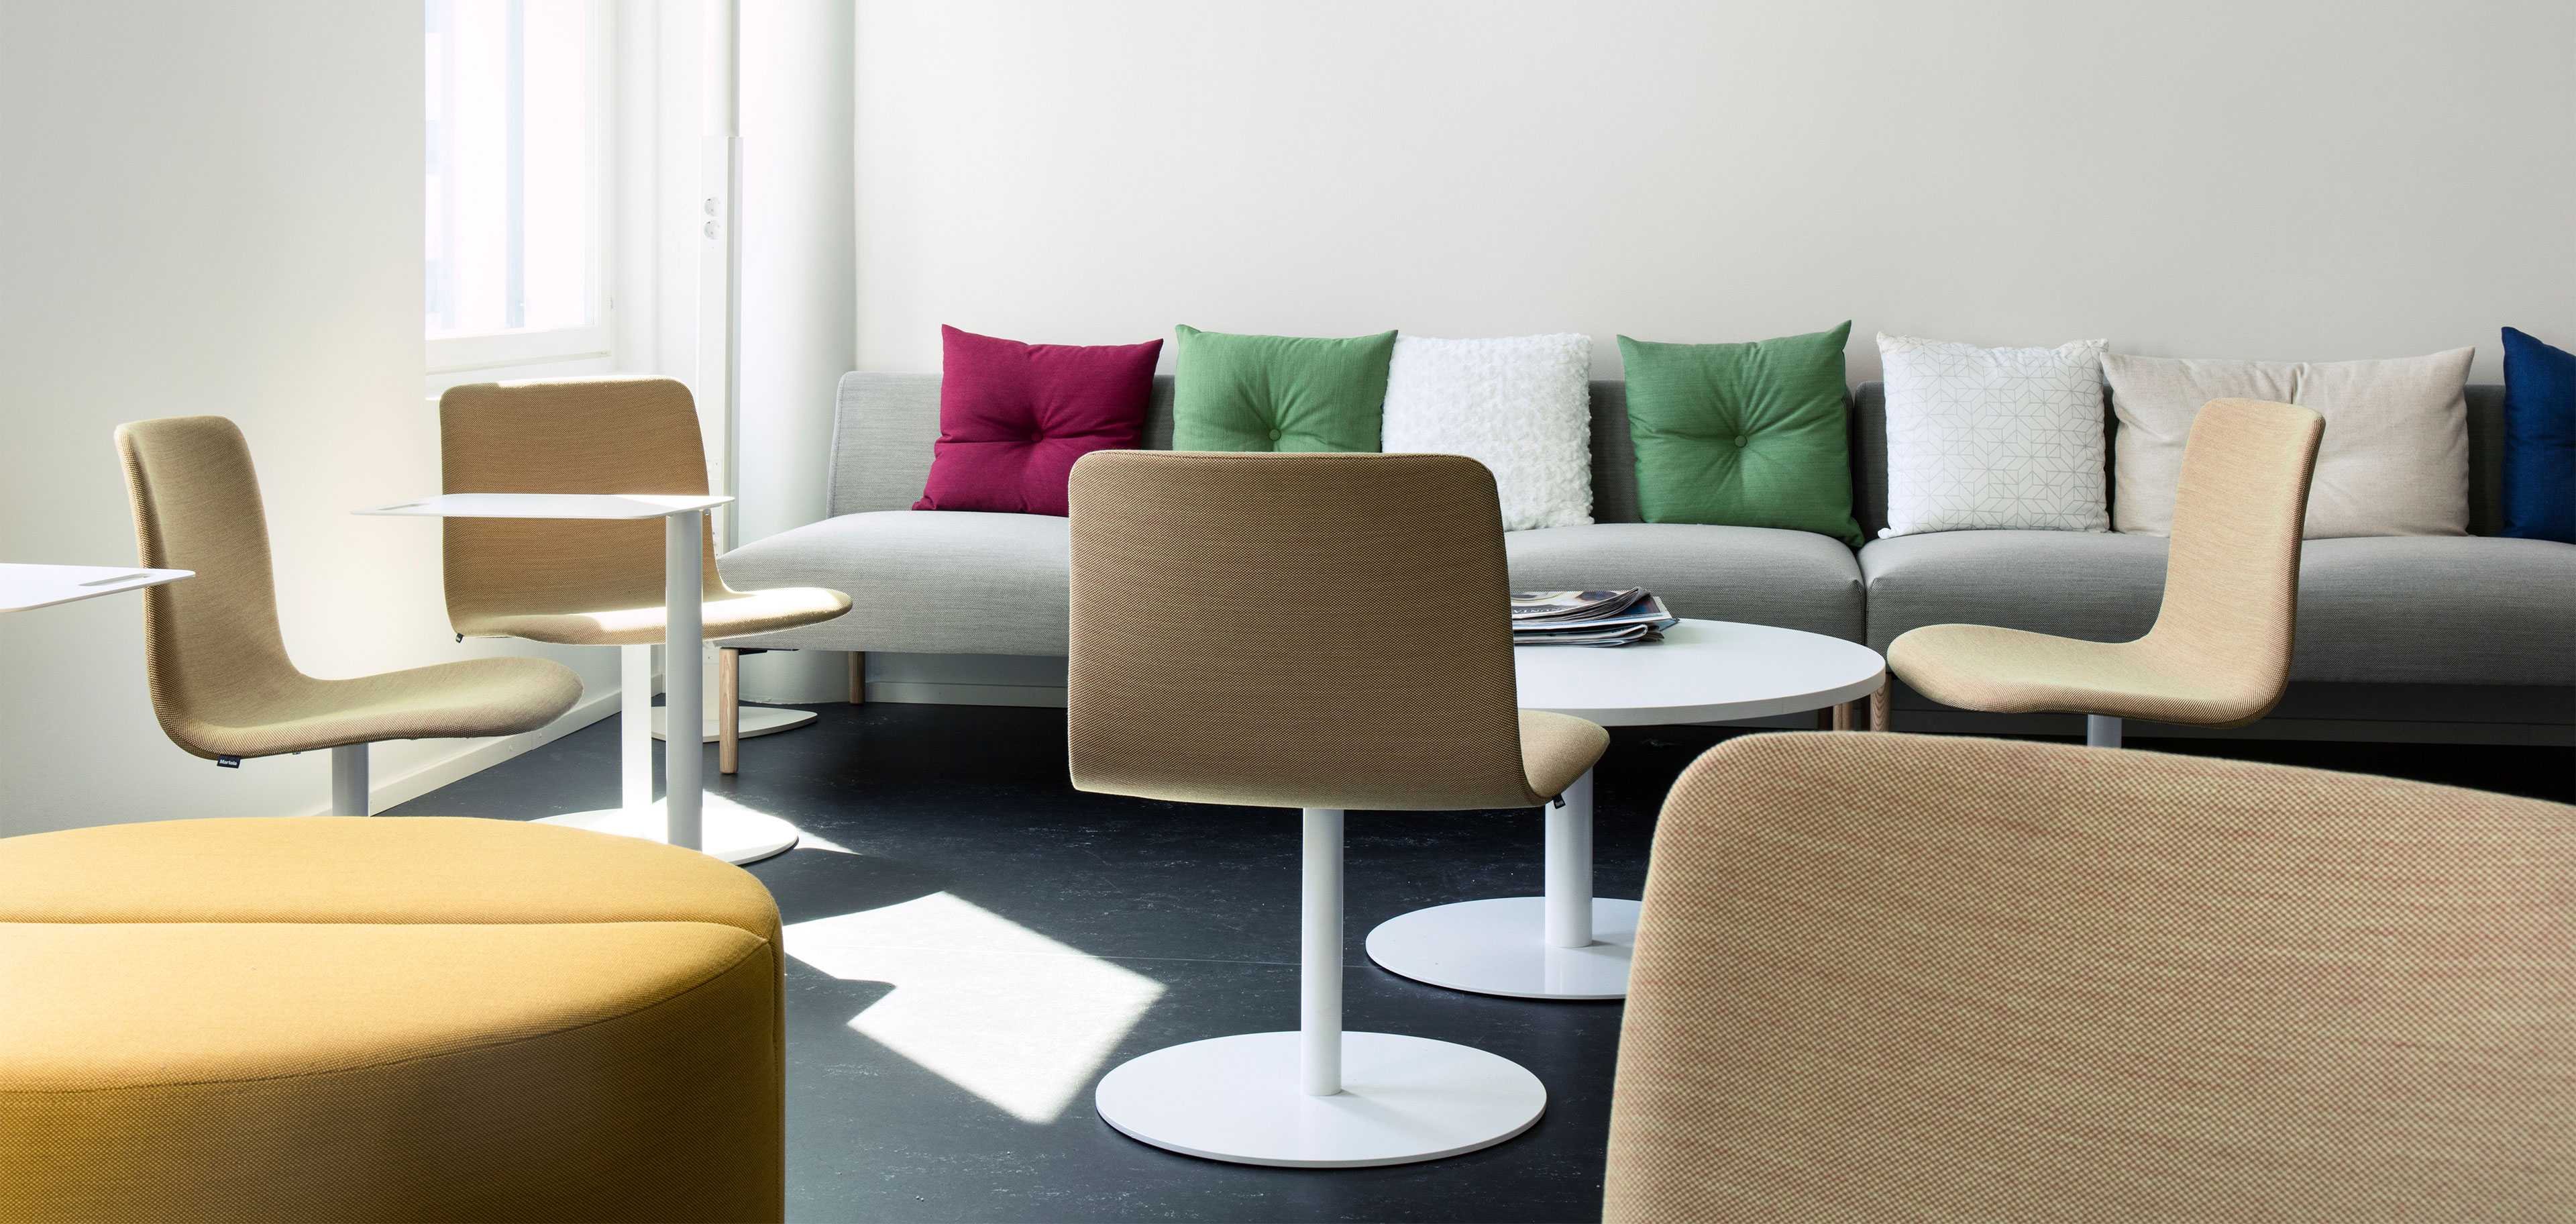 Martela's Sola chairs and Nooa sofa at Solteq's office in Vantaa, Finland